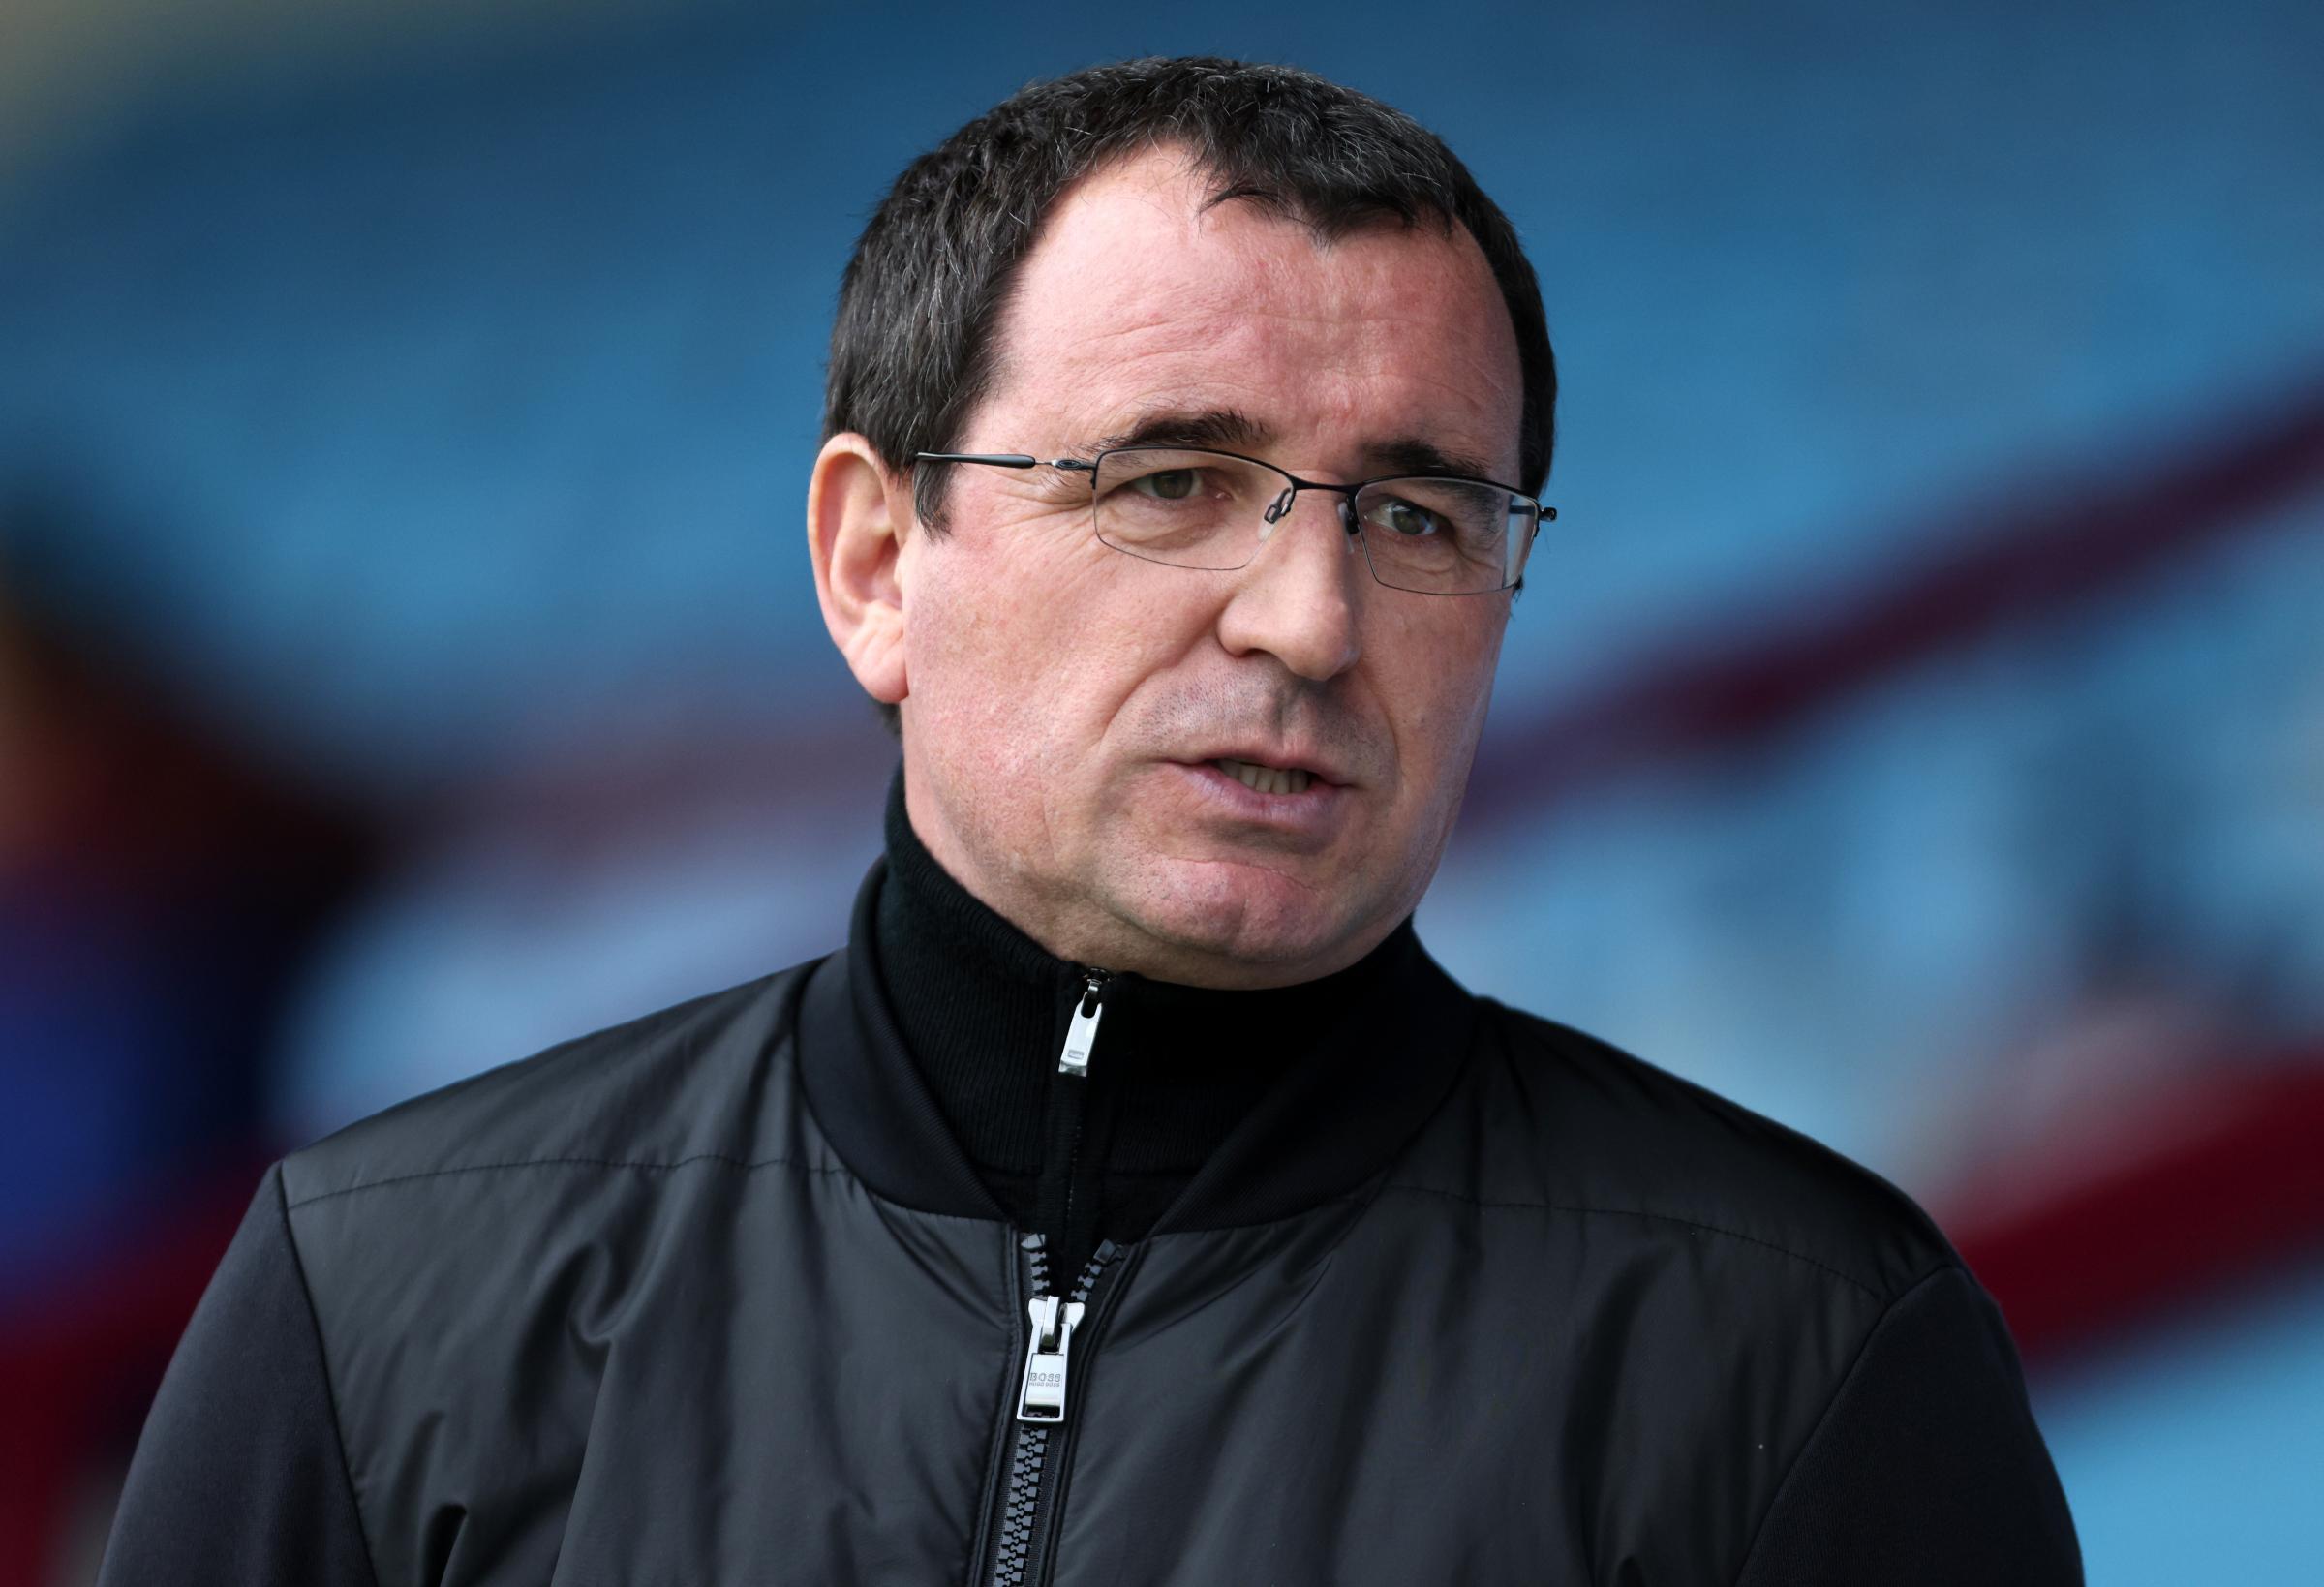 Dundee appoint ex-Blackburn boss Gary Bowyer as new manager